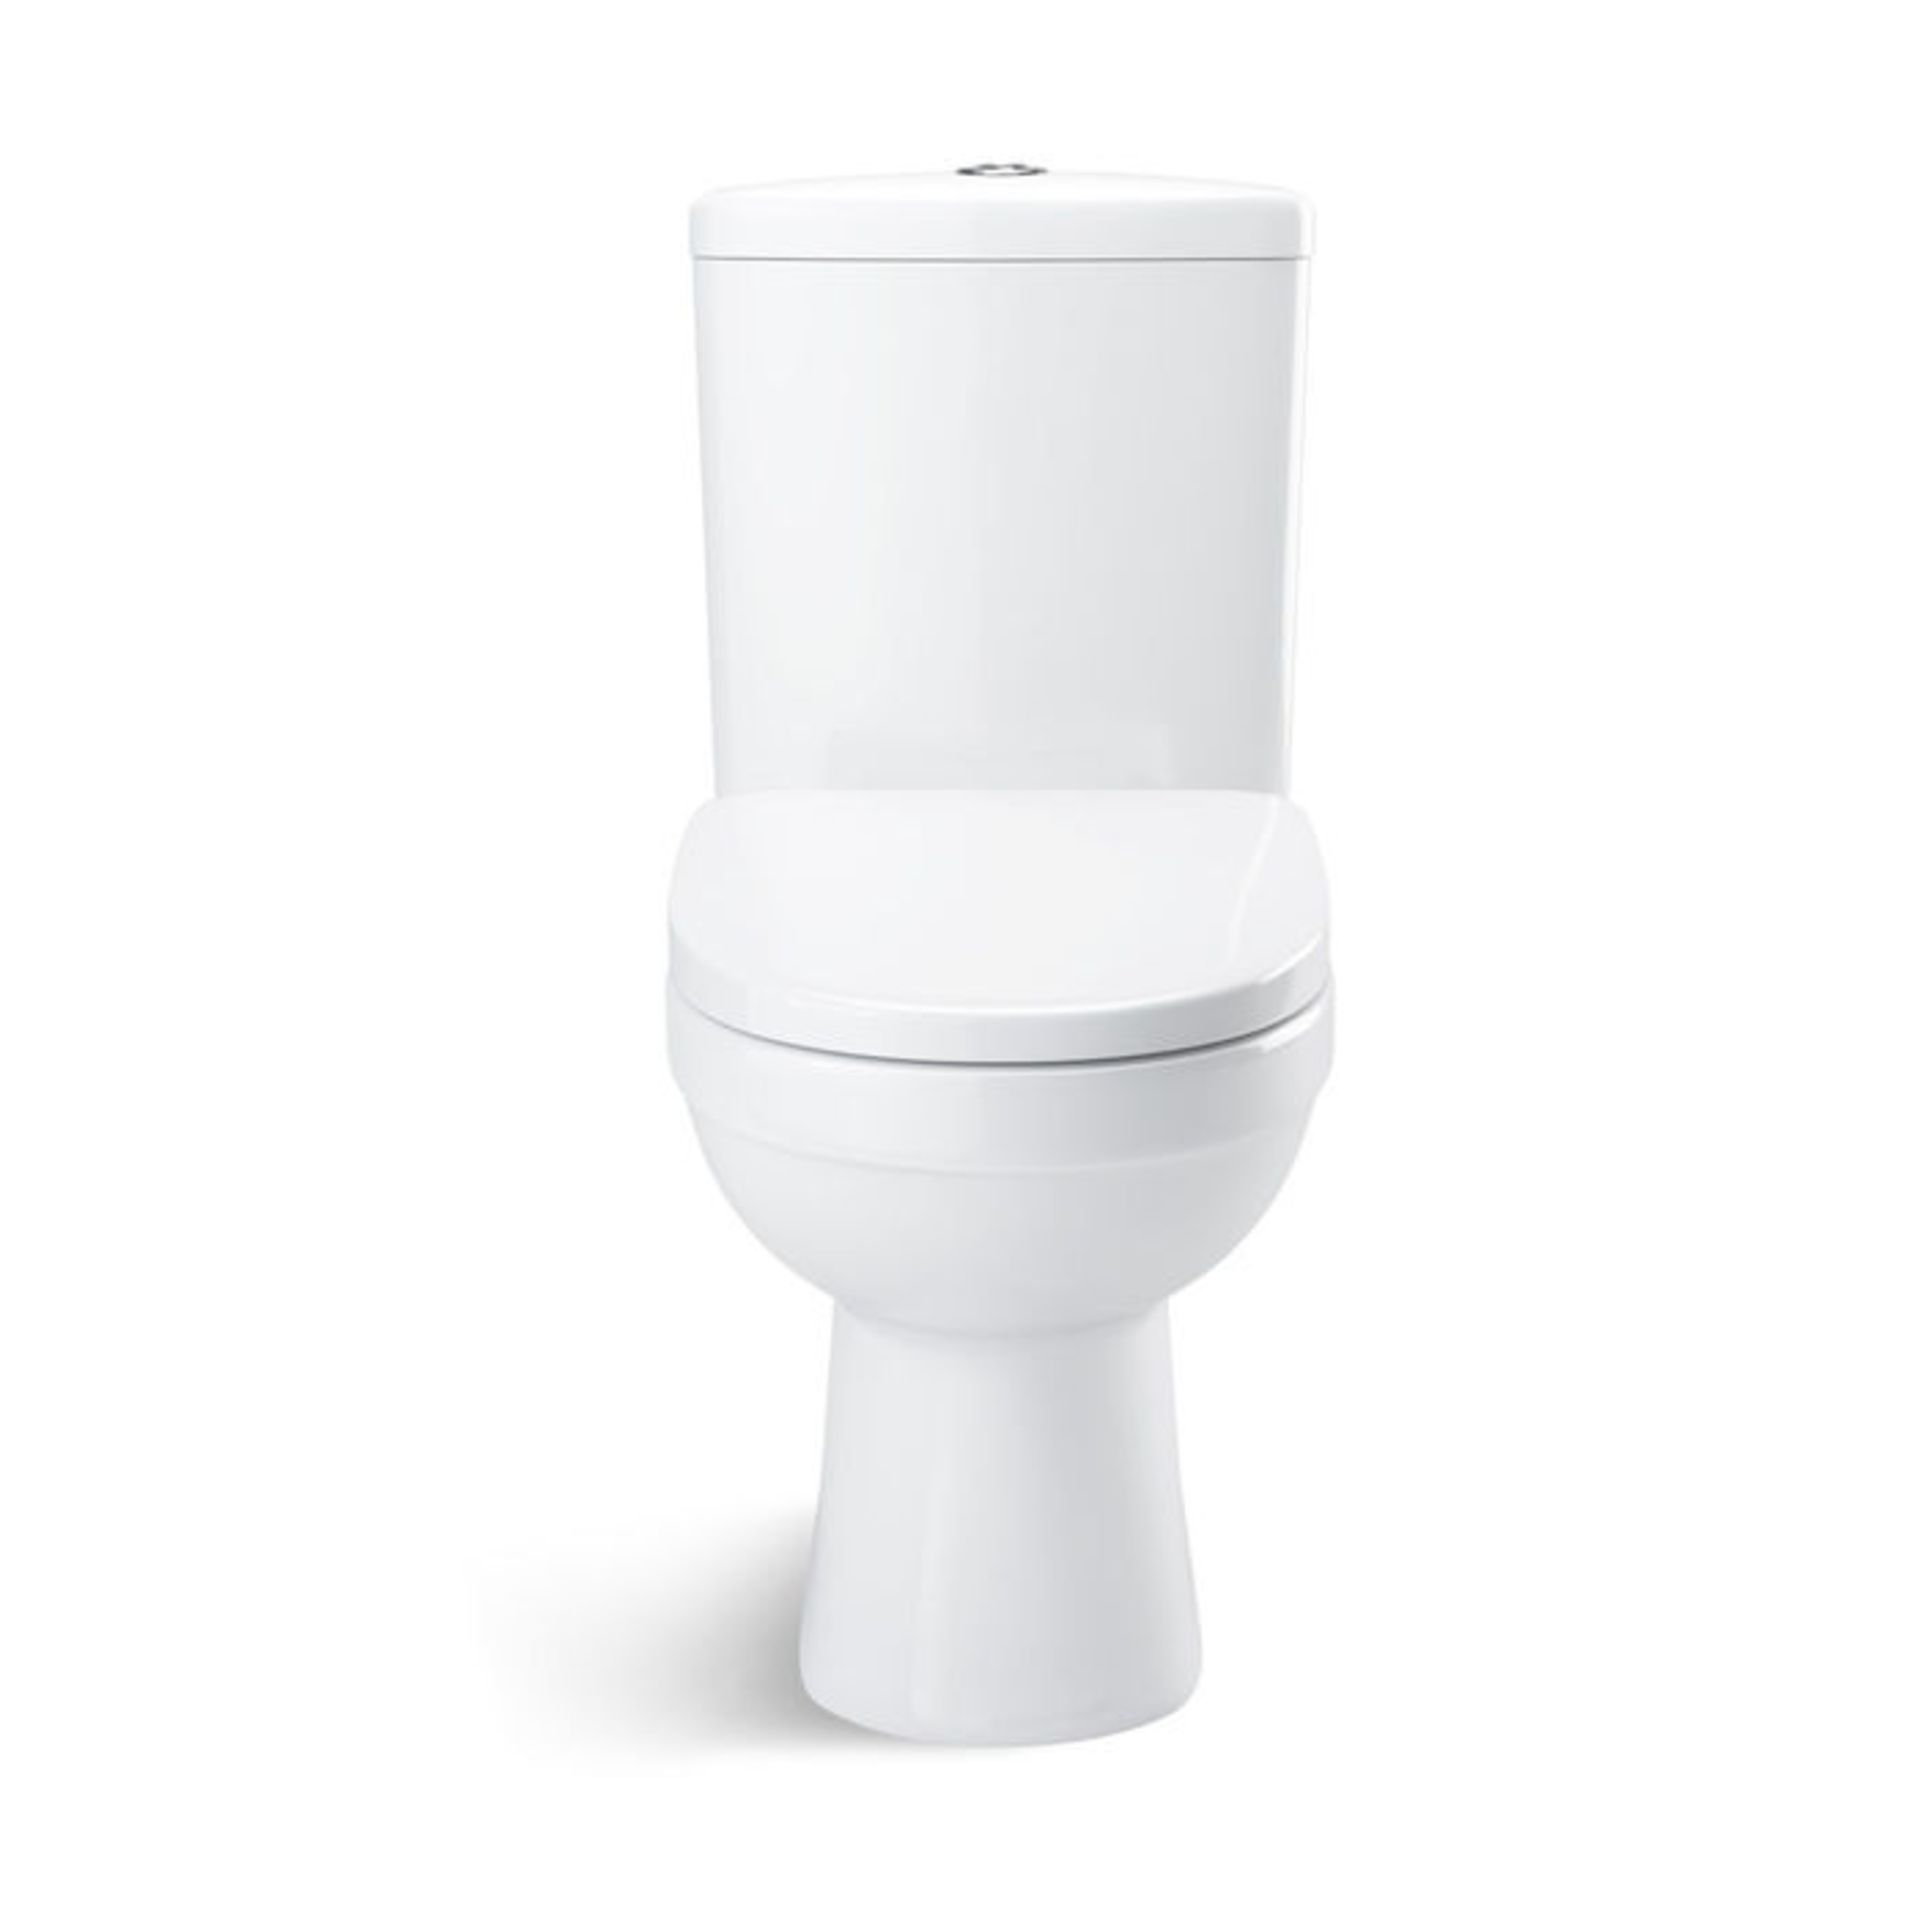 (OS26) Sabrosa II Close Coupled Toilet & Cistern inc Soft Close Seat. Made from White Vitreous China - Image 3 of 4